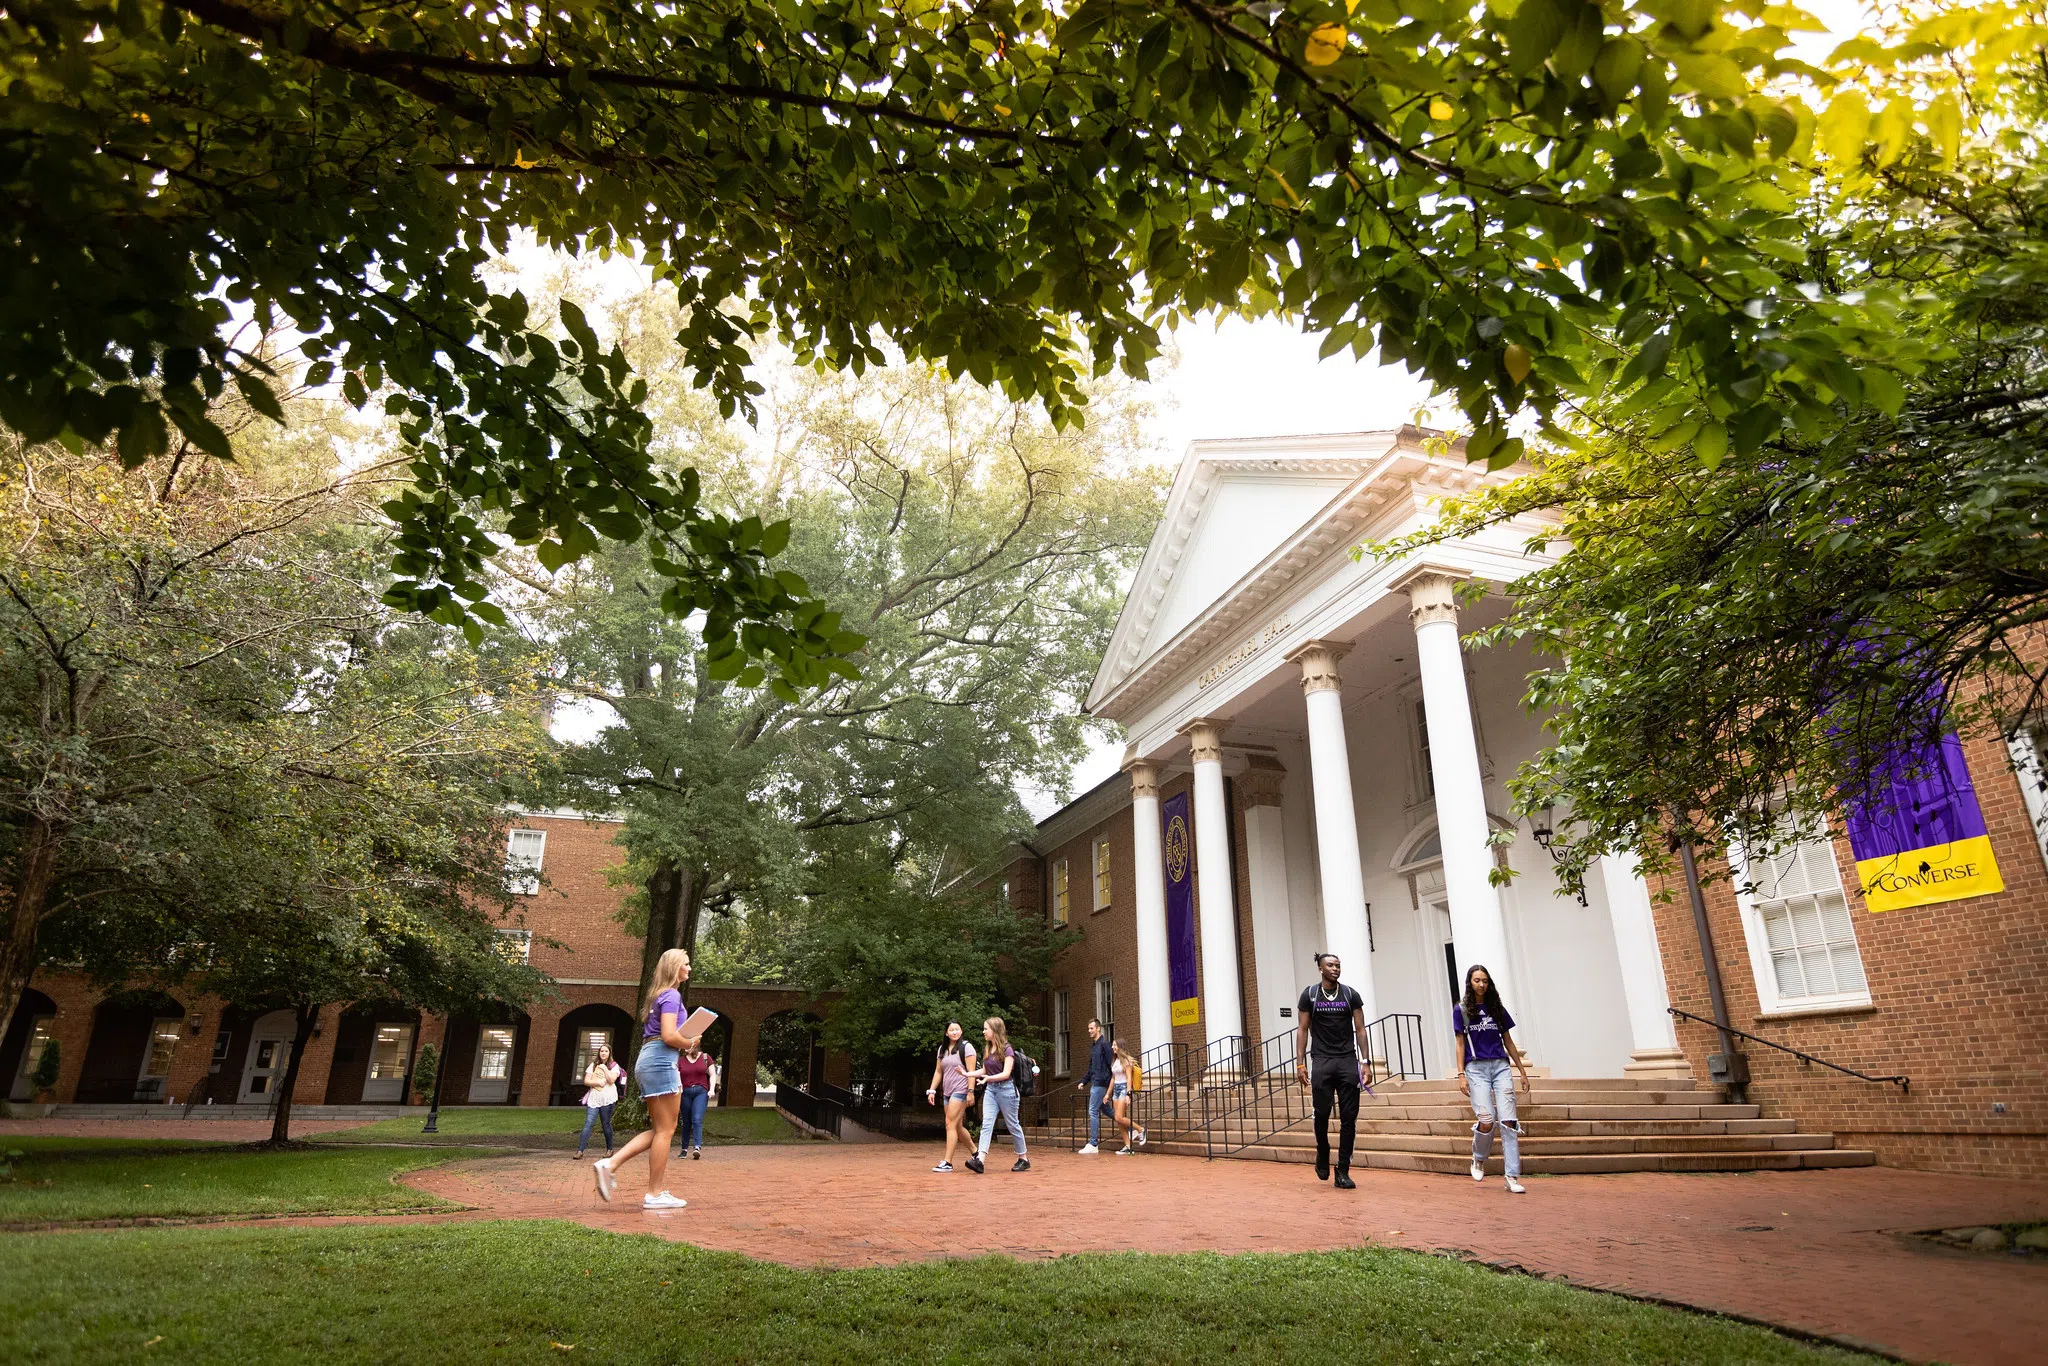 Students walk on brick walkways in front of a two story brick building featuring a four-column portico painted white.